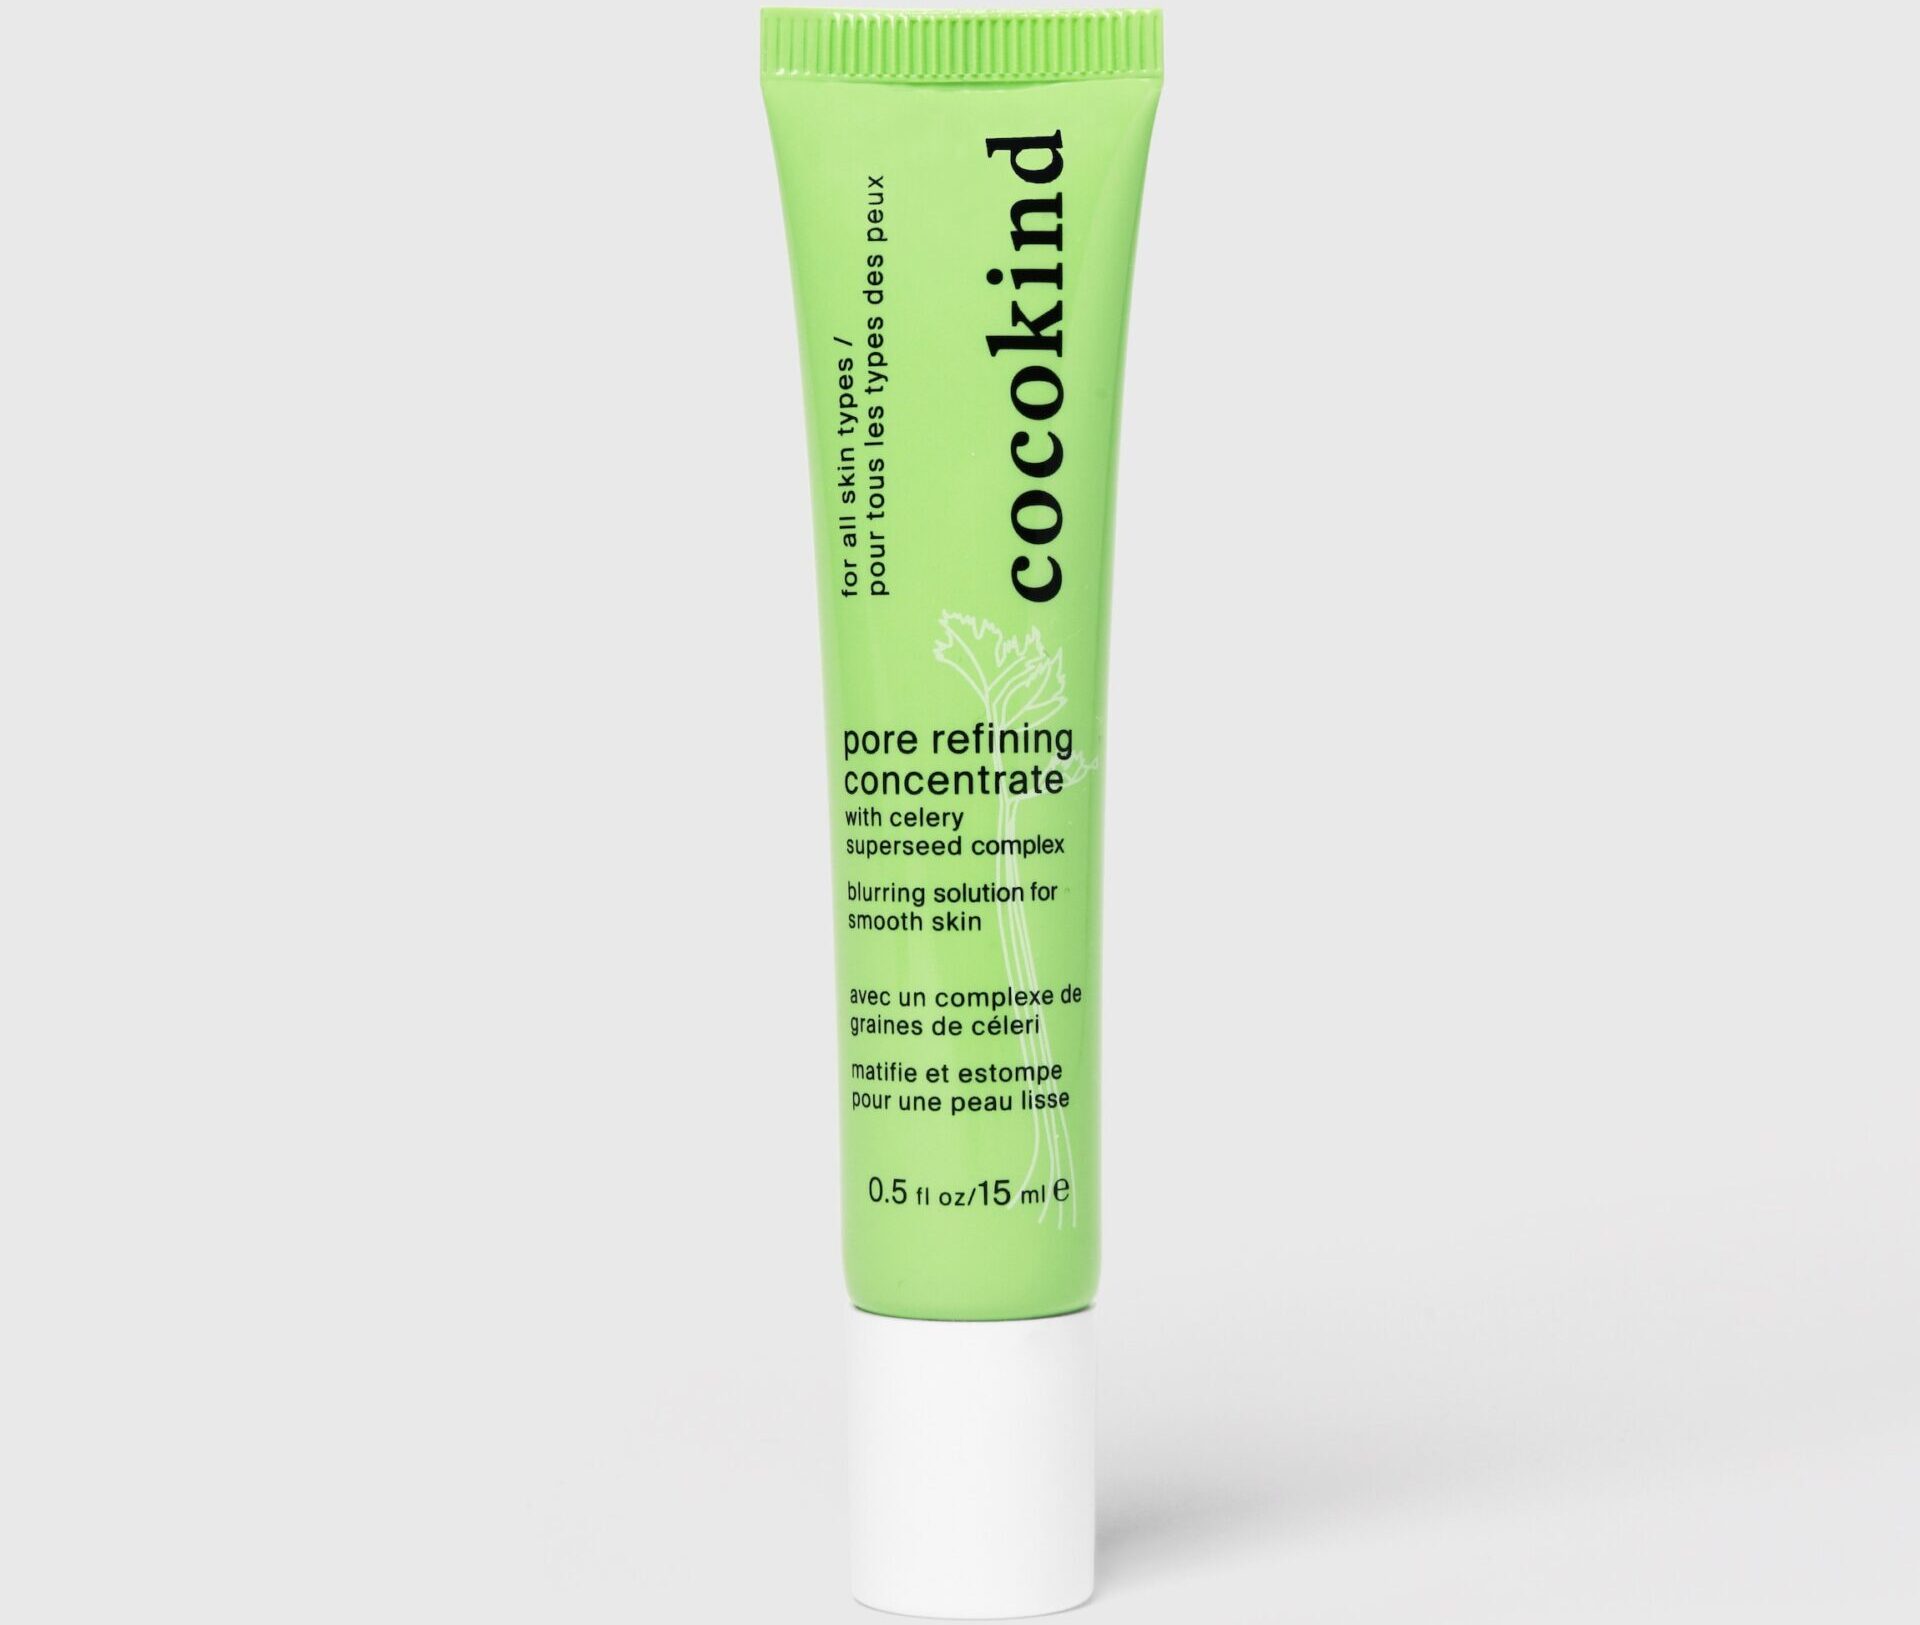 Cocokind pore refining concentrate